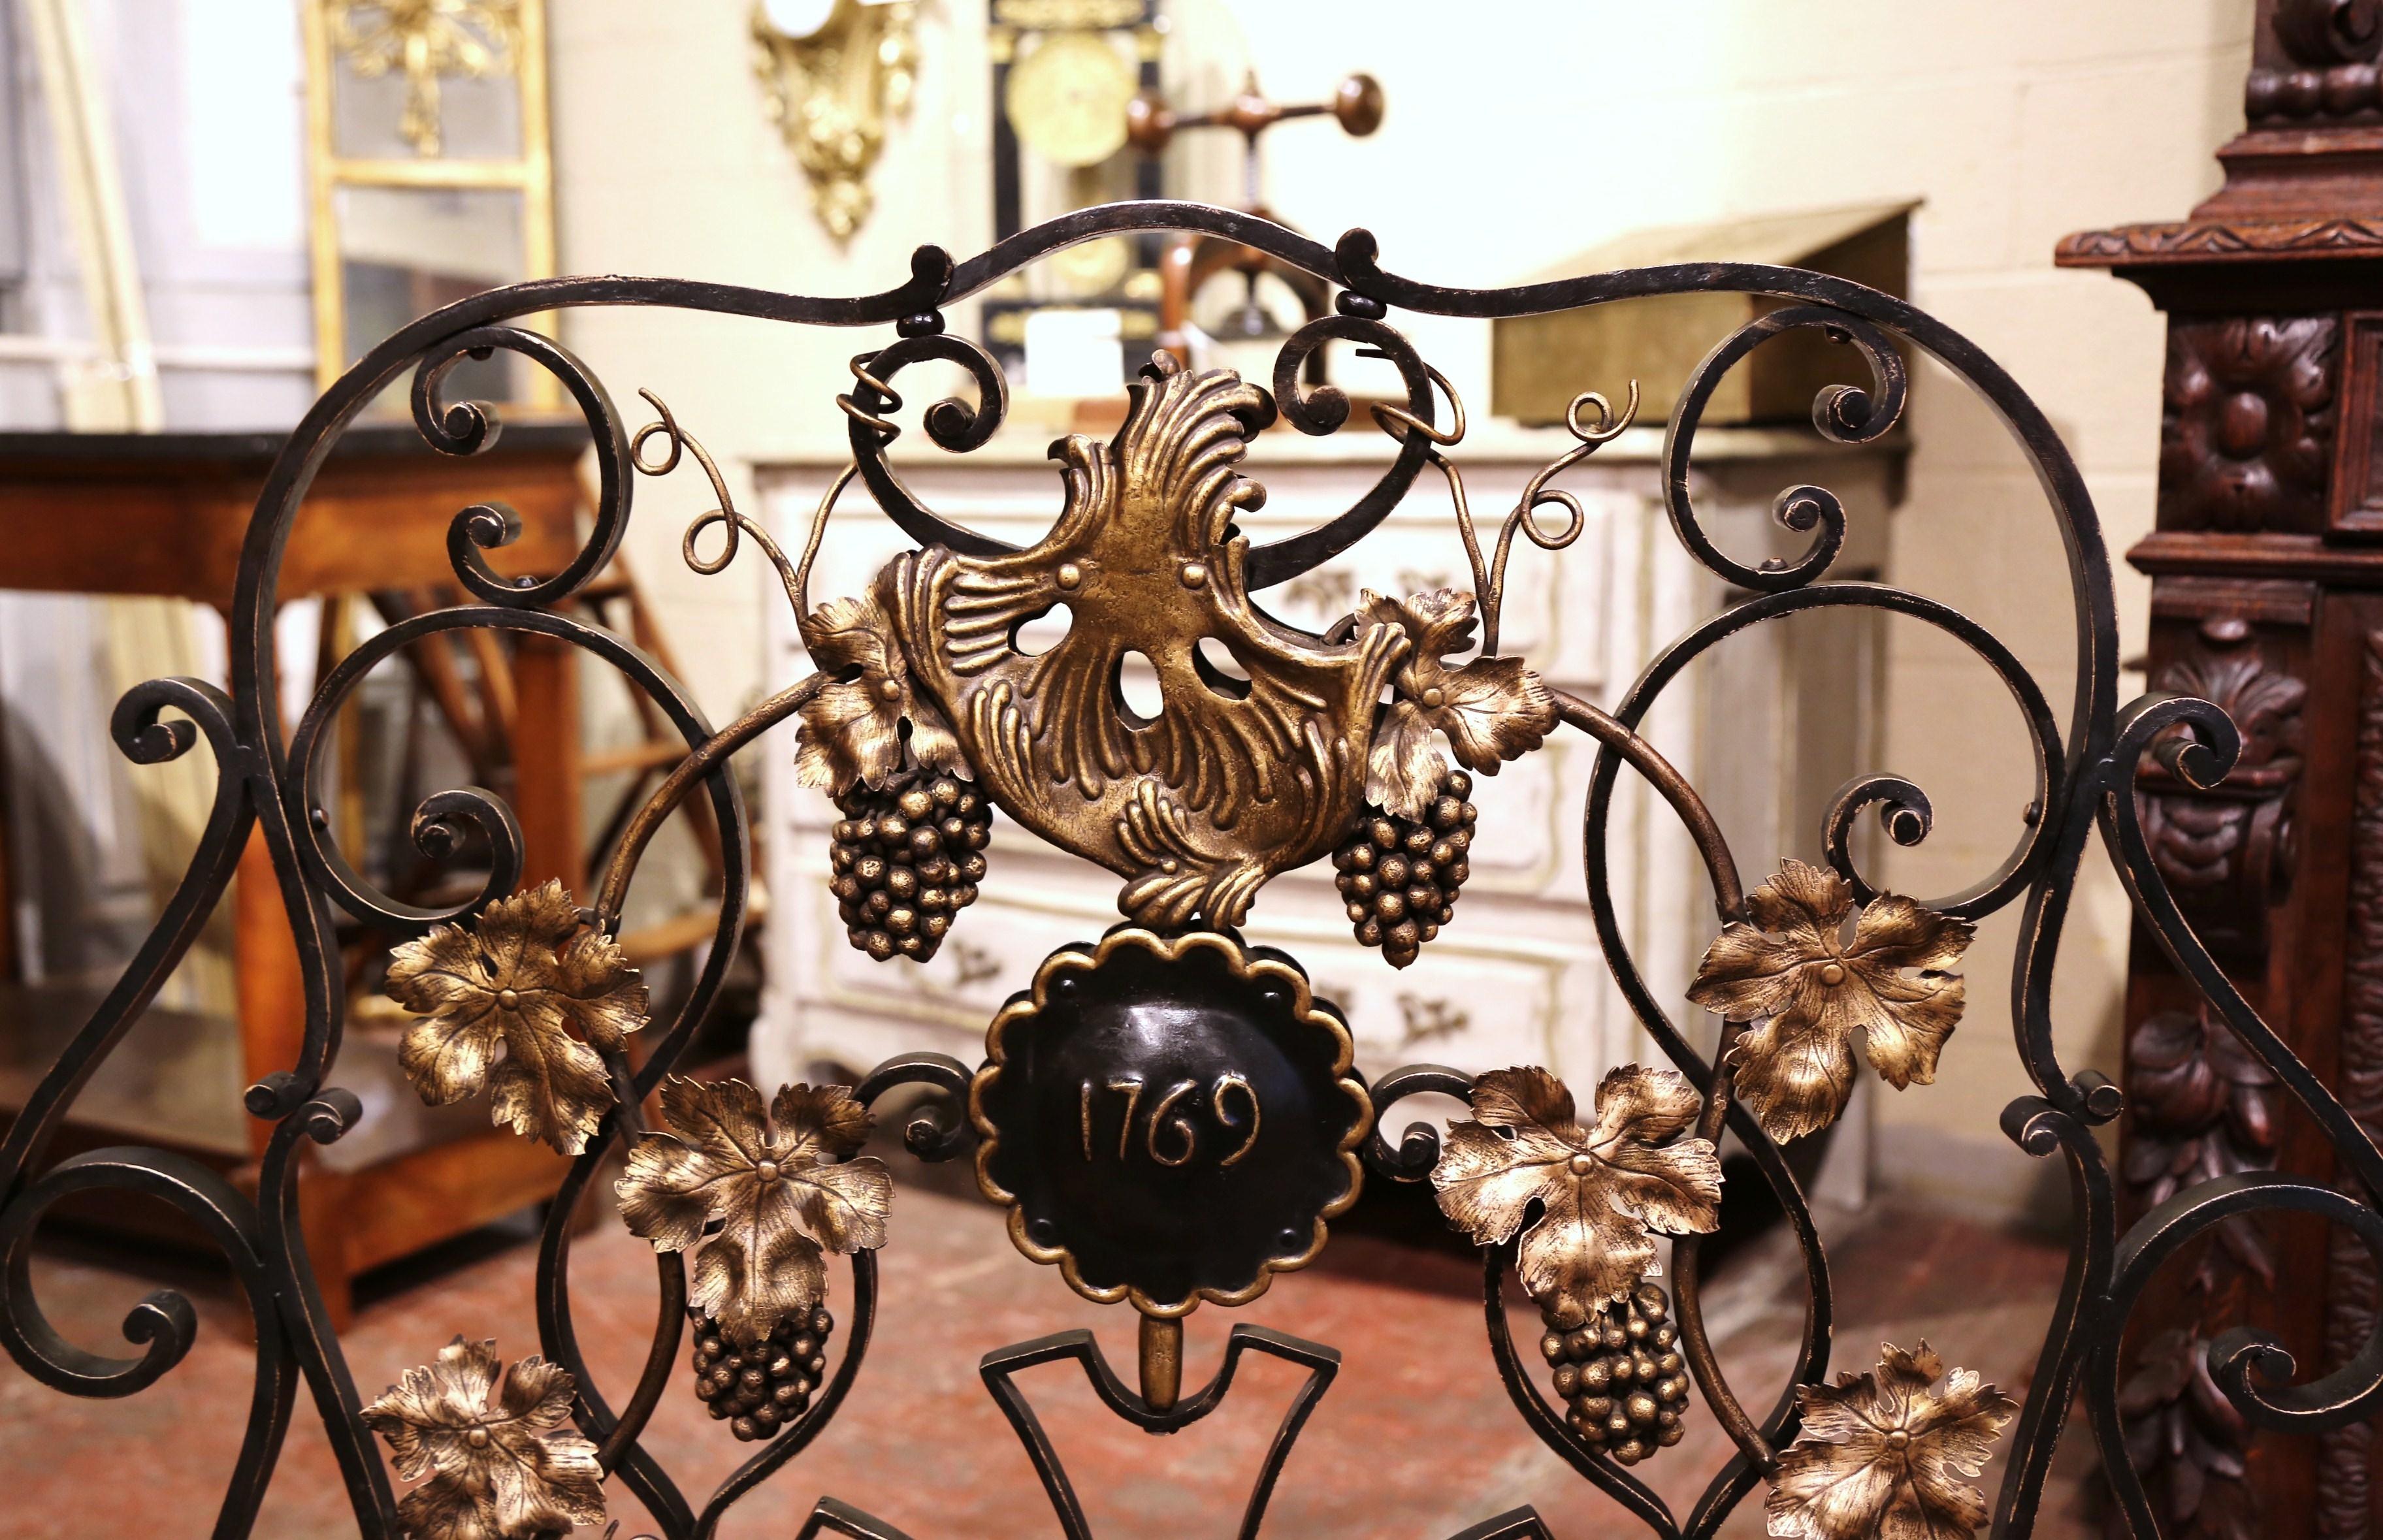 Decorate a fireplace hearth with this elegant freestanding antique iron screen. Forged in France circa 1950, the decorative screen with serpentine top stands on scrolled feet and is heavily decorated with grape and leaf motifs in high relief; it is